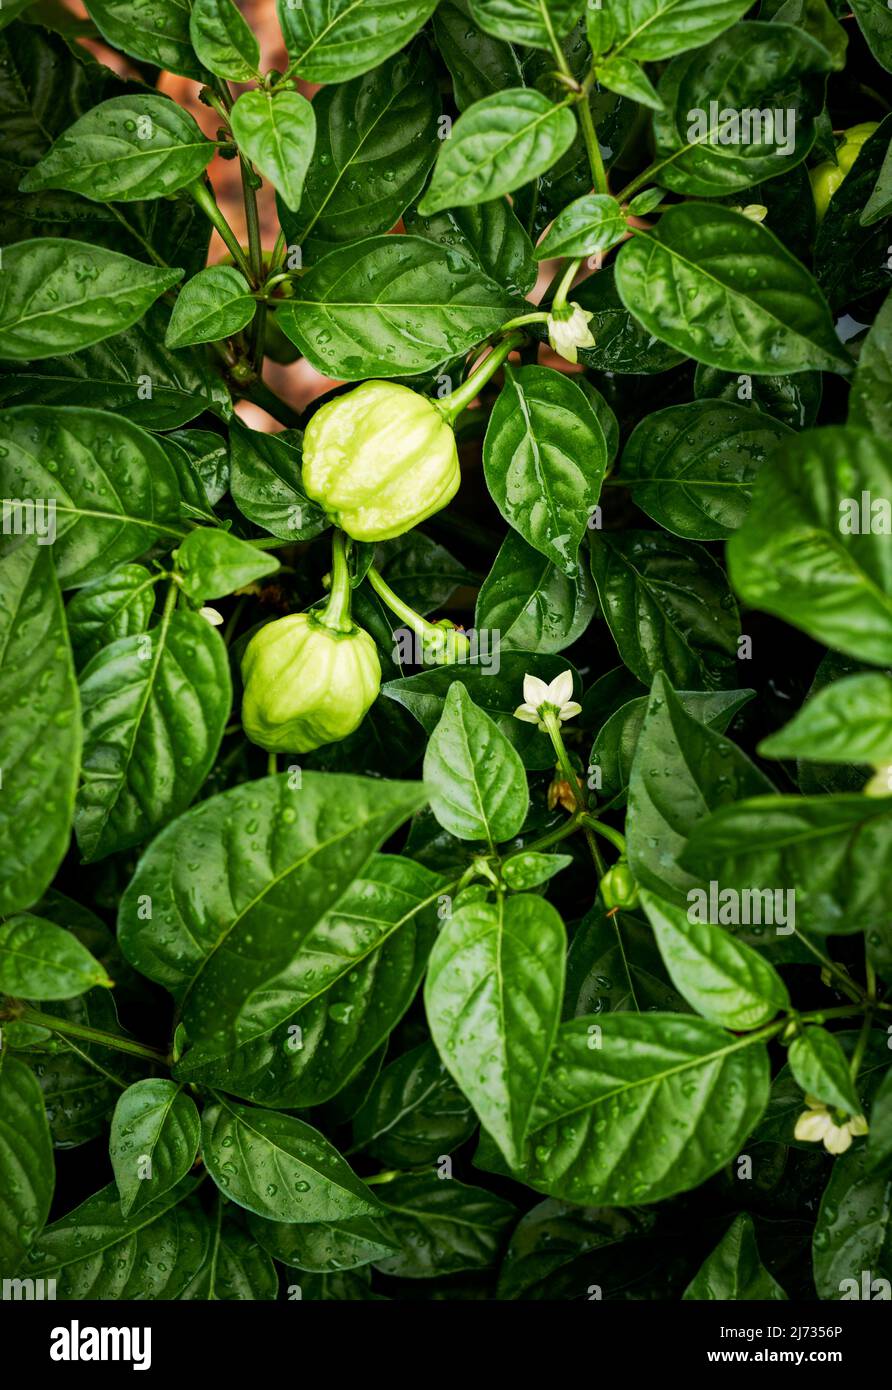 Habanero Chilli plant with green chillies and dainty white flowers Stock Photo